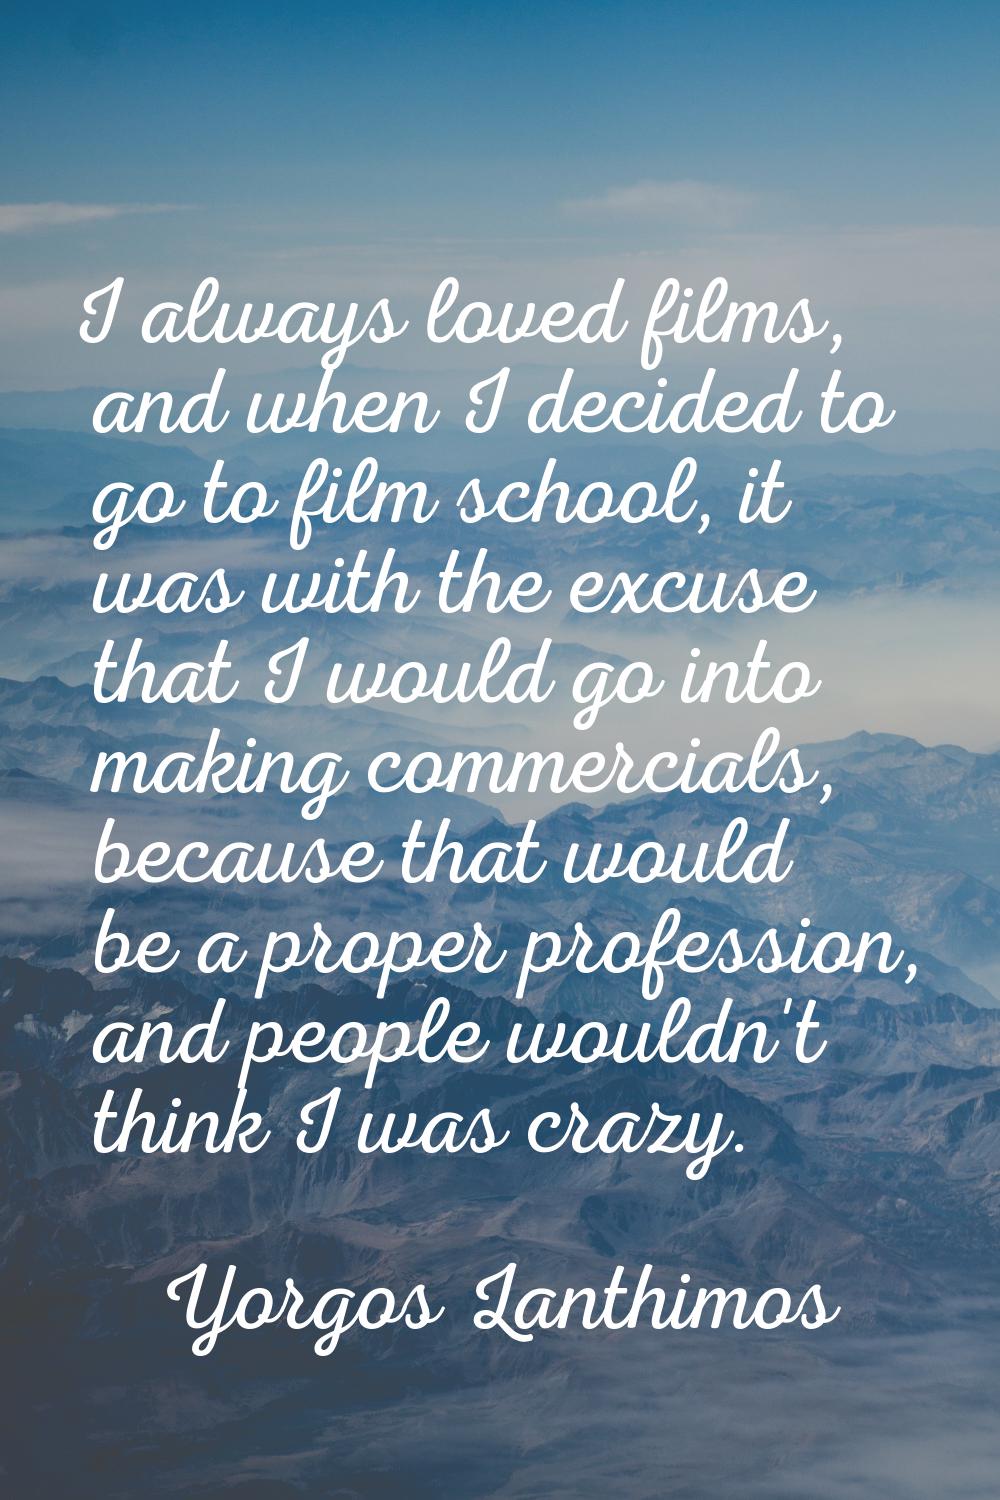 I always loved films, and when I decided to go to film school, it was with the excuse that I would 